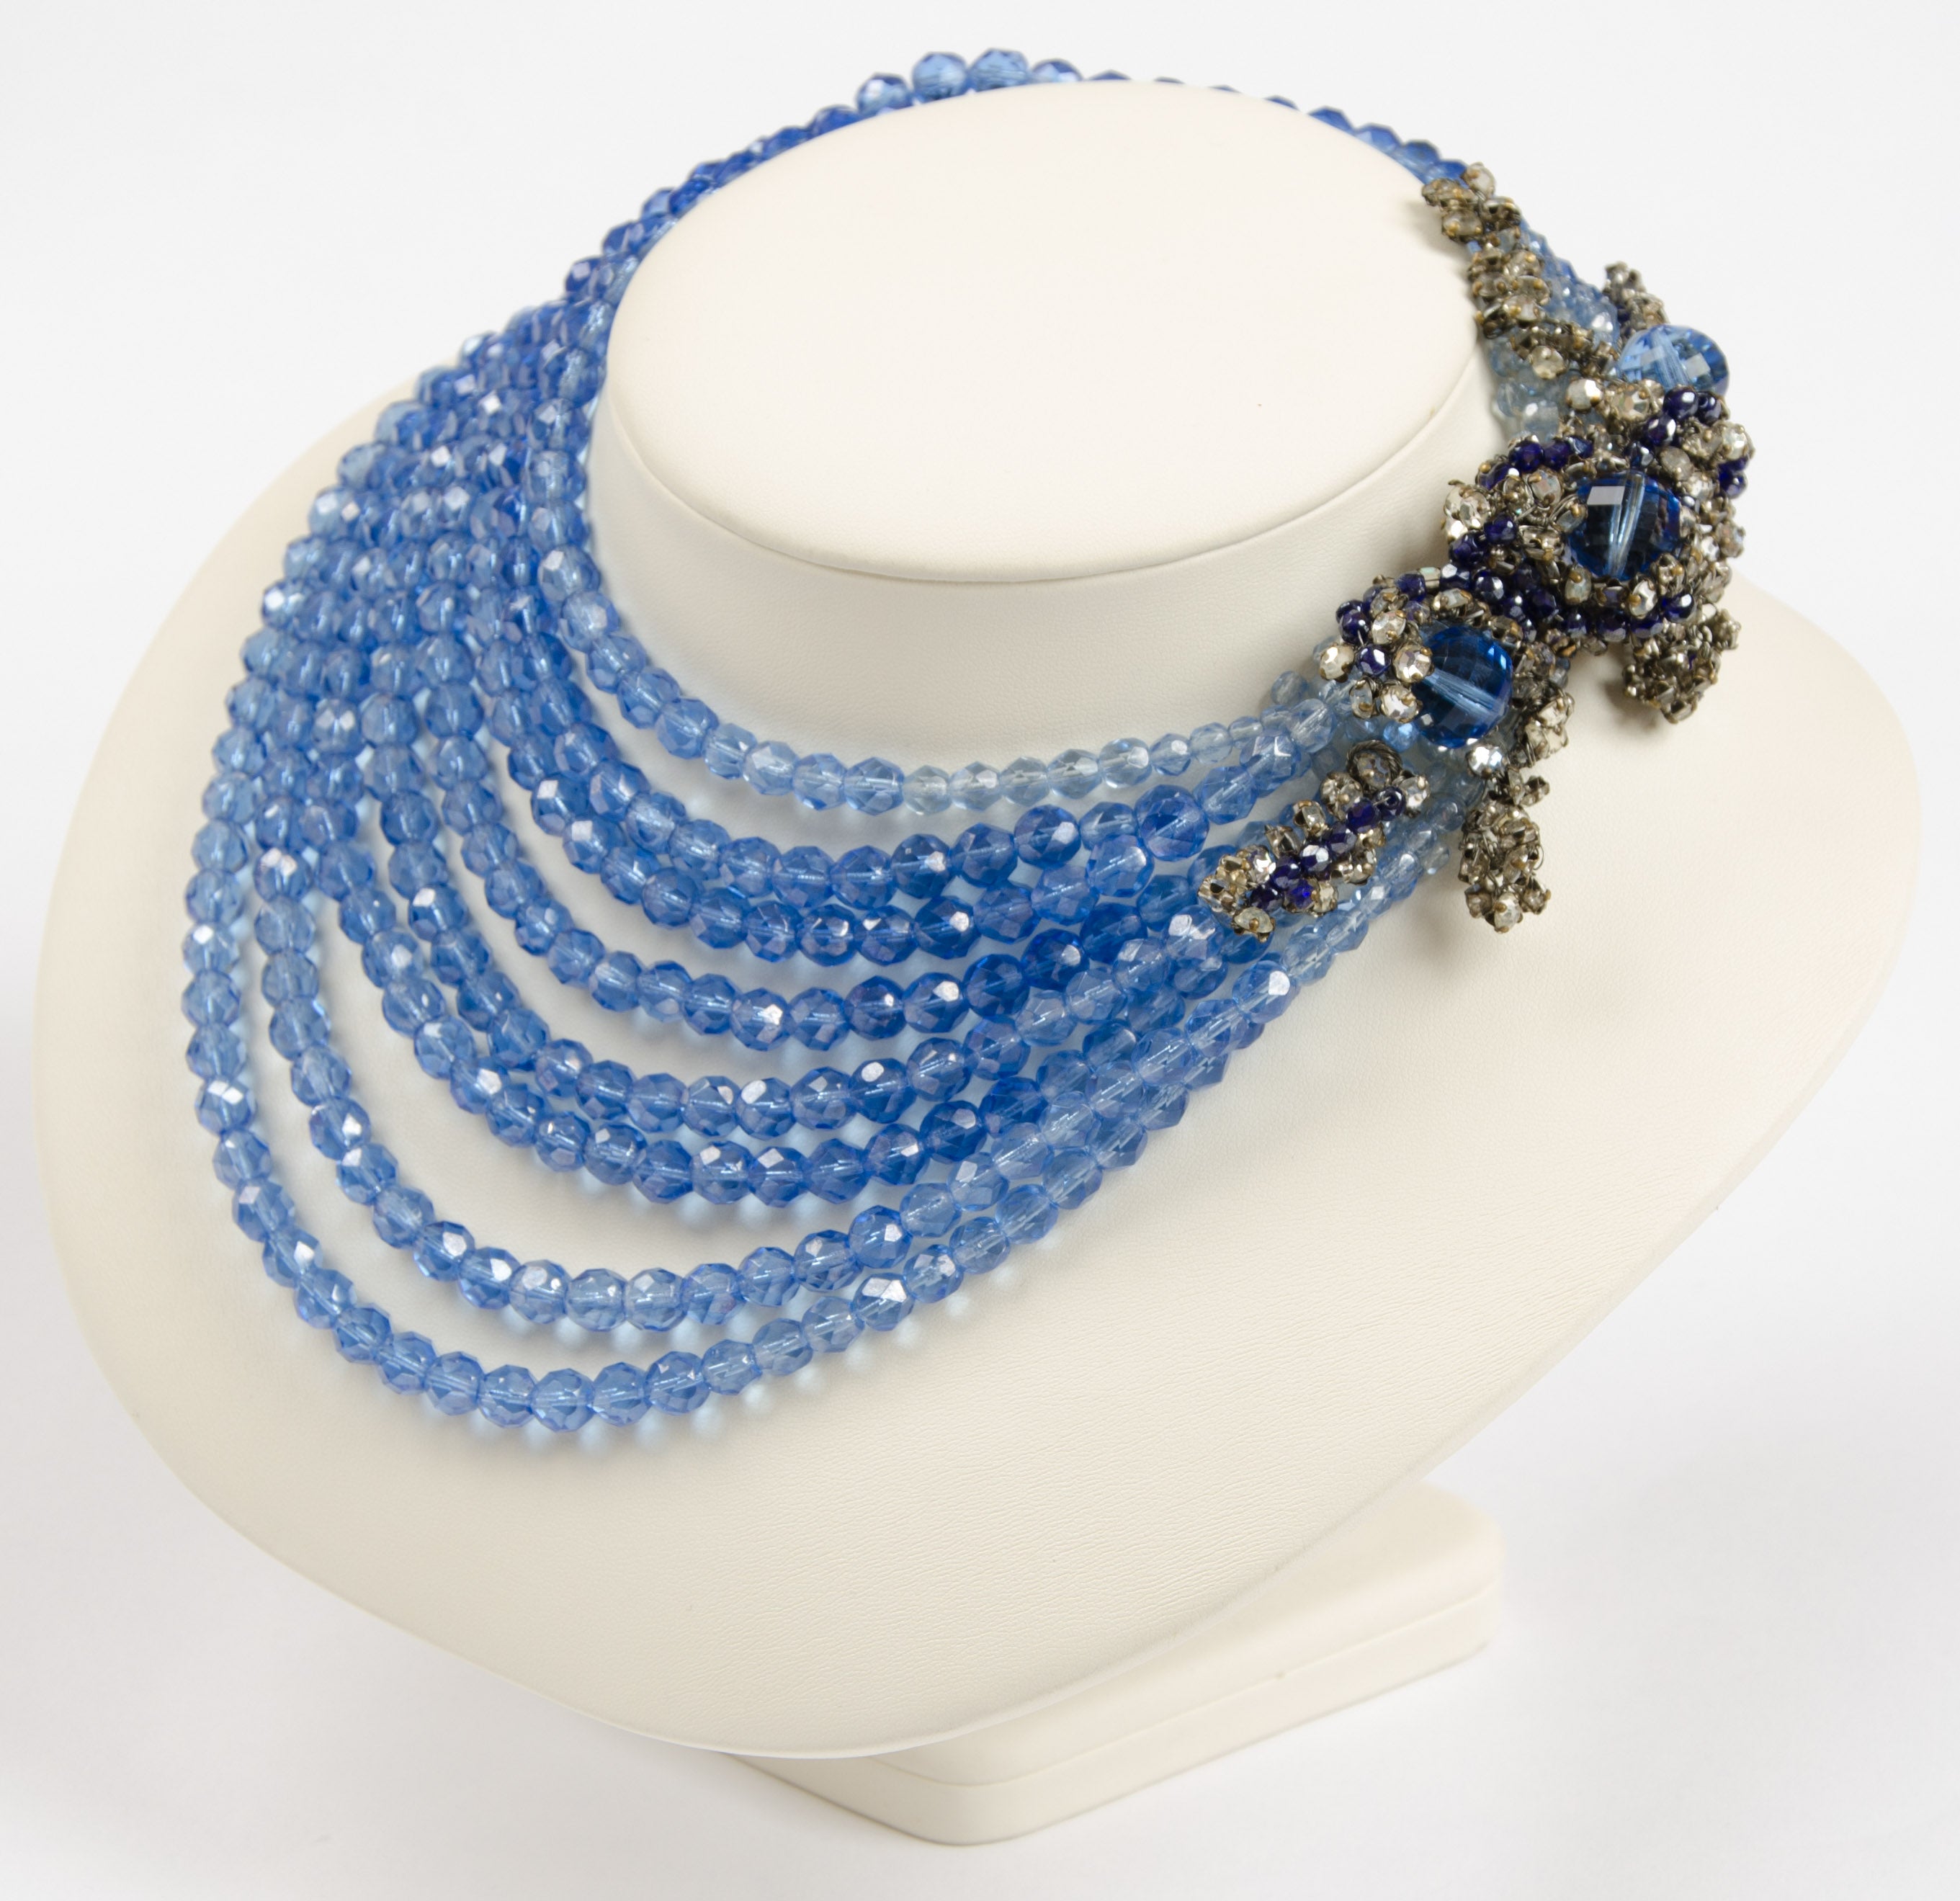 Bead Impressive crystal multi row necklace with dynamic clasp, Coppola e Toppo, 1950s